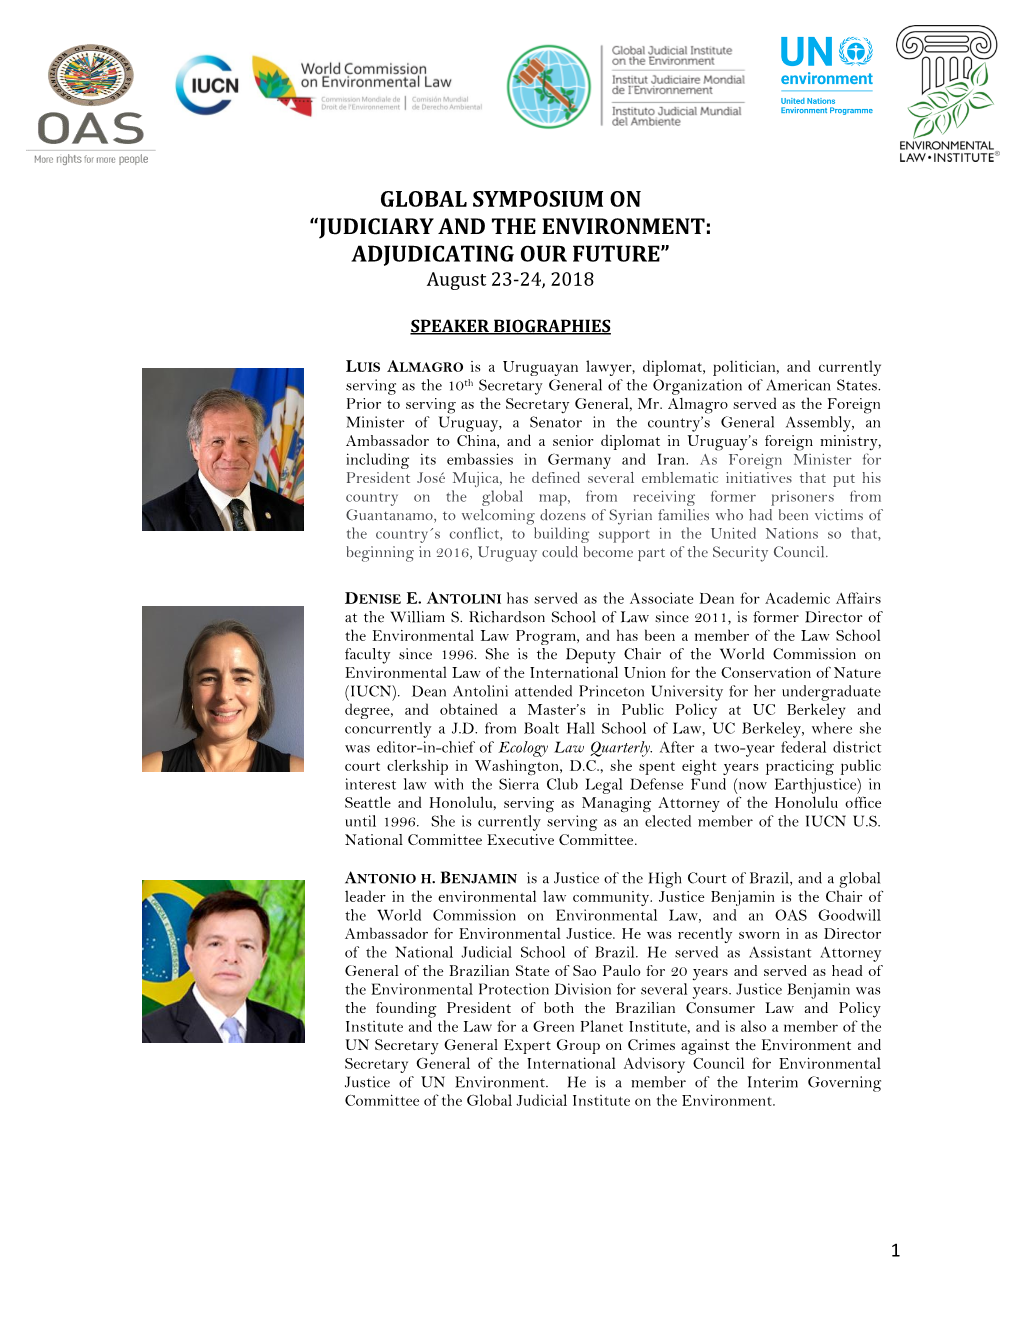 GLOBAL SYMPOSIUM on “JUDICIARY and the ENVIRONMENT: ADJUDICATING OUR FUTURE” August 23-24, 2018